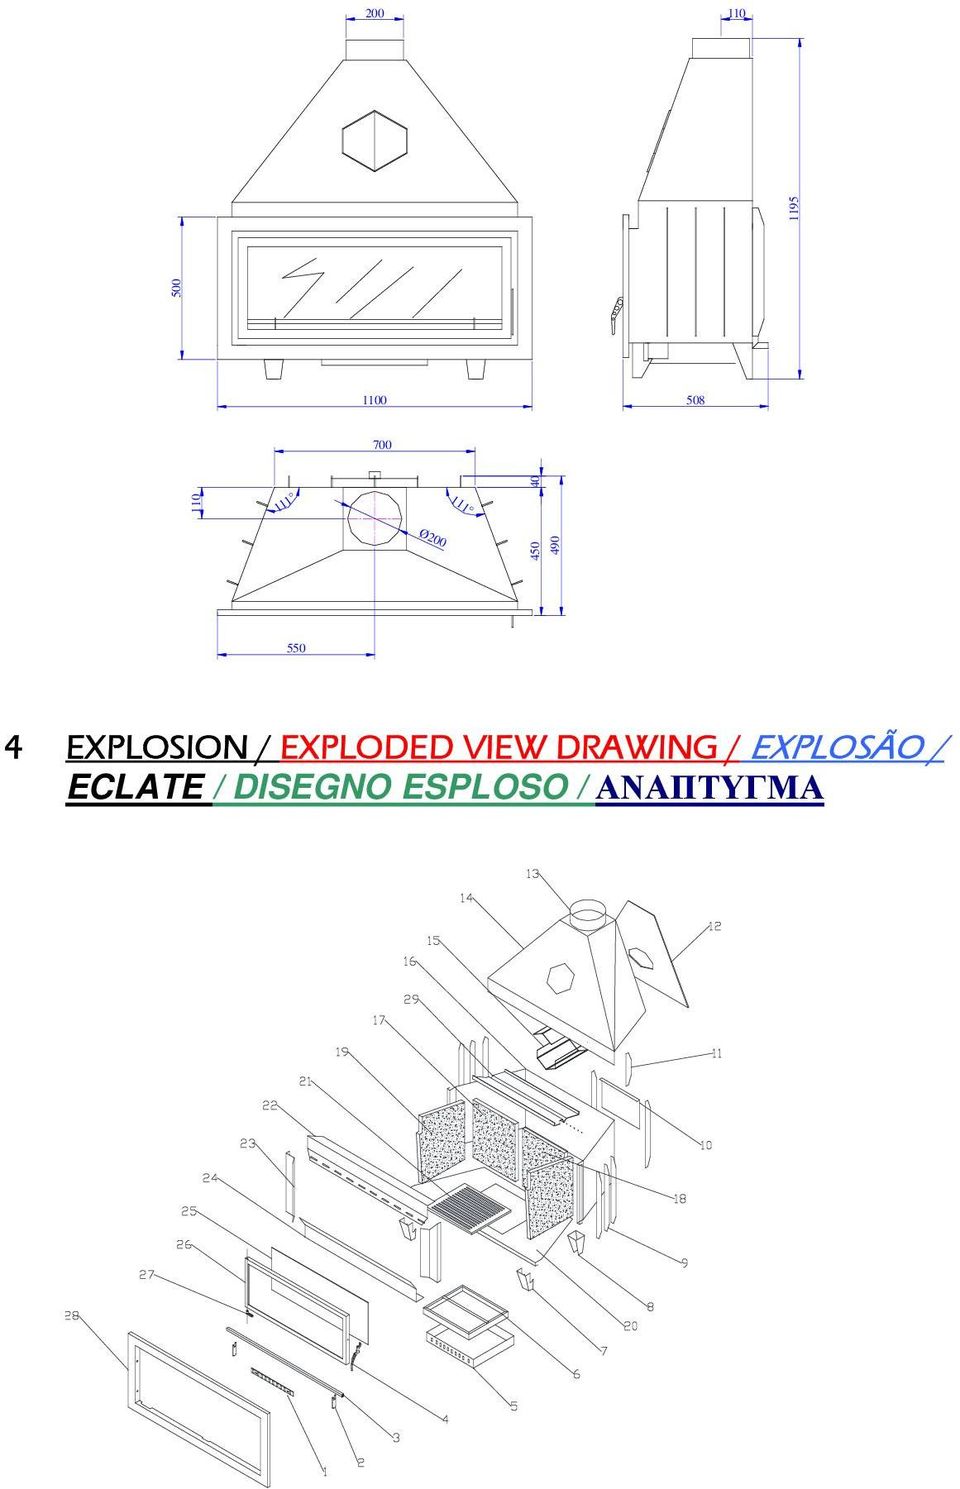 EXPLOSION / EXPLODED VIEW DRAWING /